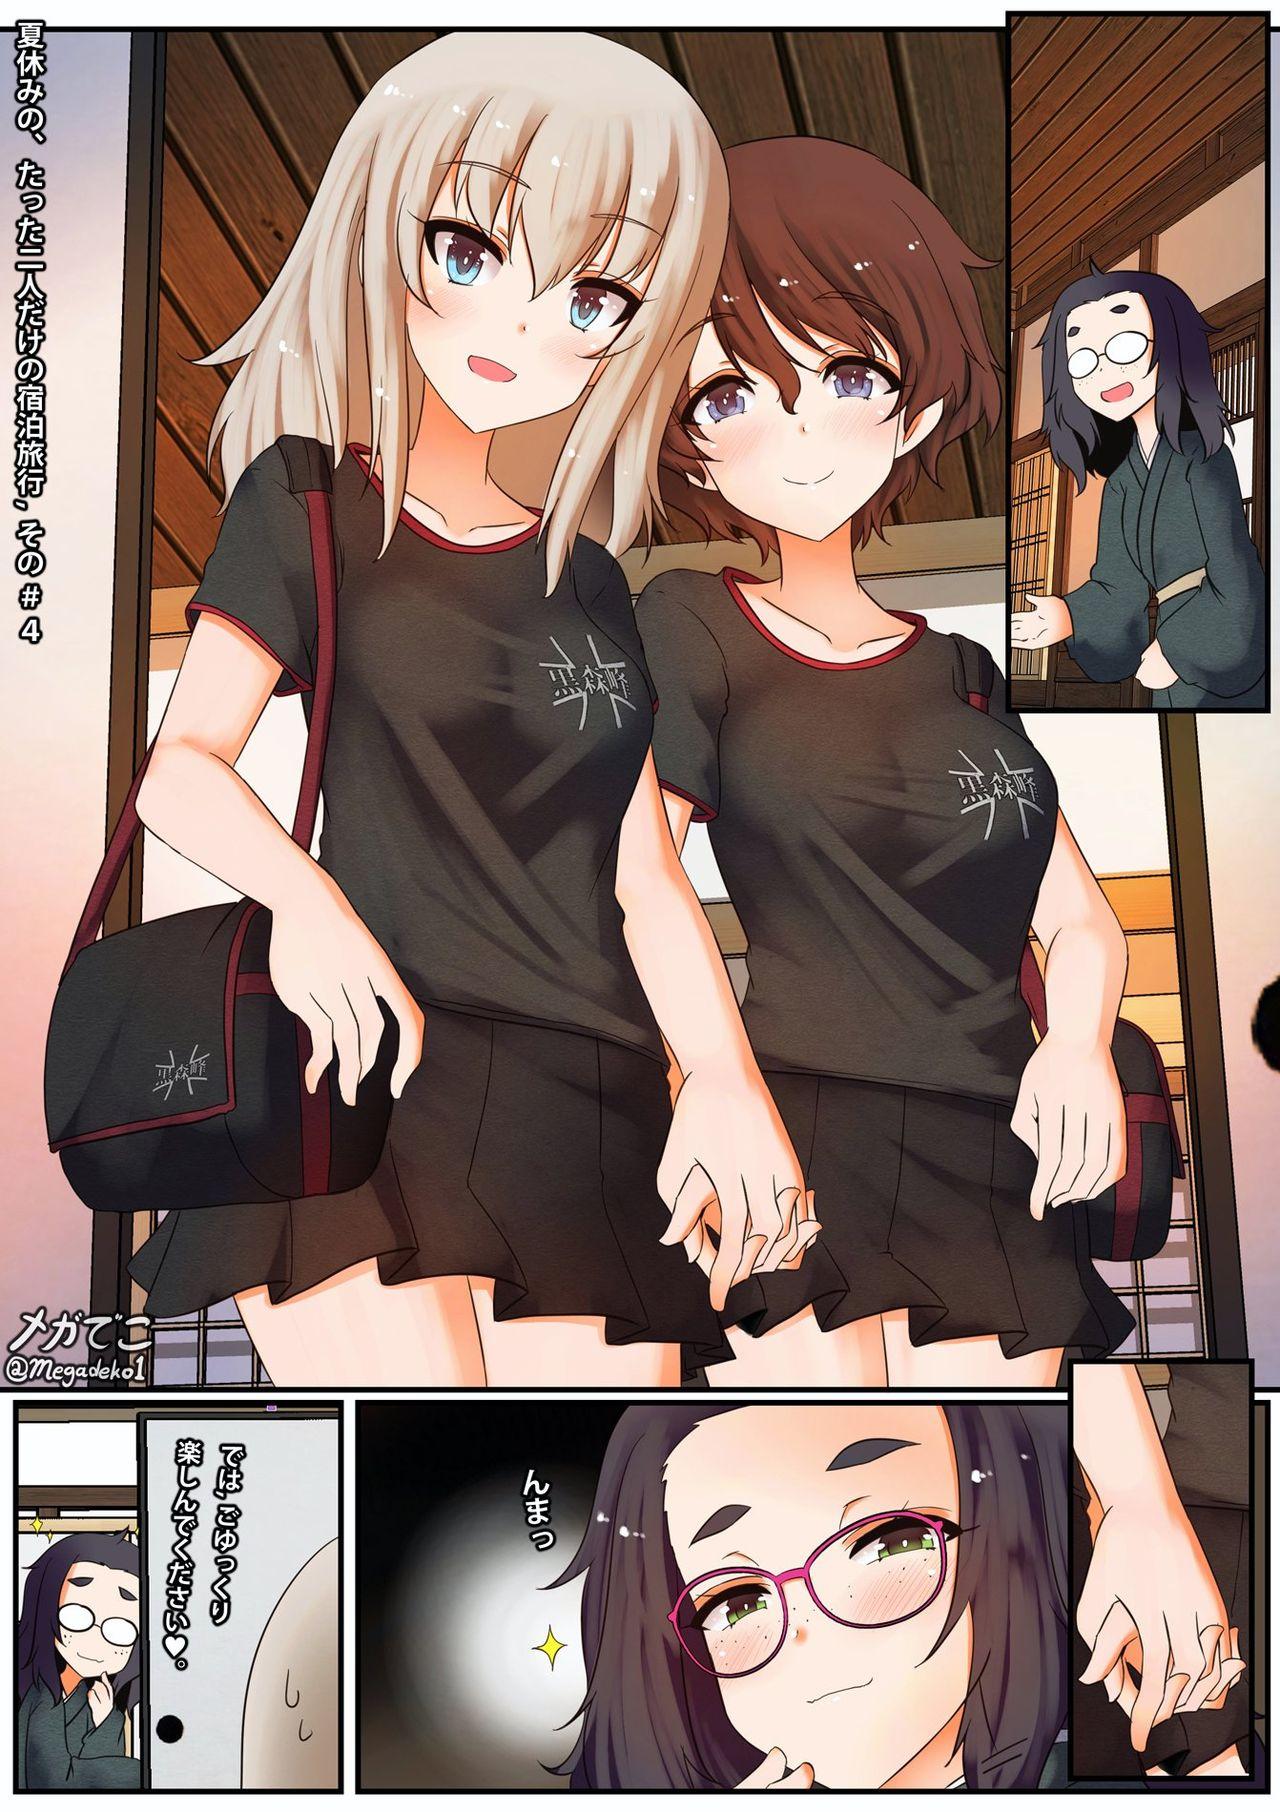 Pussy To Mouth 夏休みの、エリカと小梅のたった二人だけの宿泊旅行 その - Girls und panzer Online - Page 4